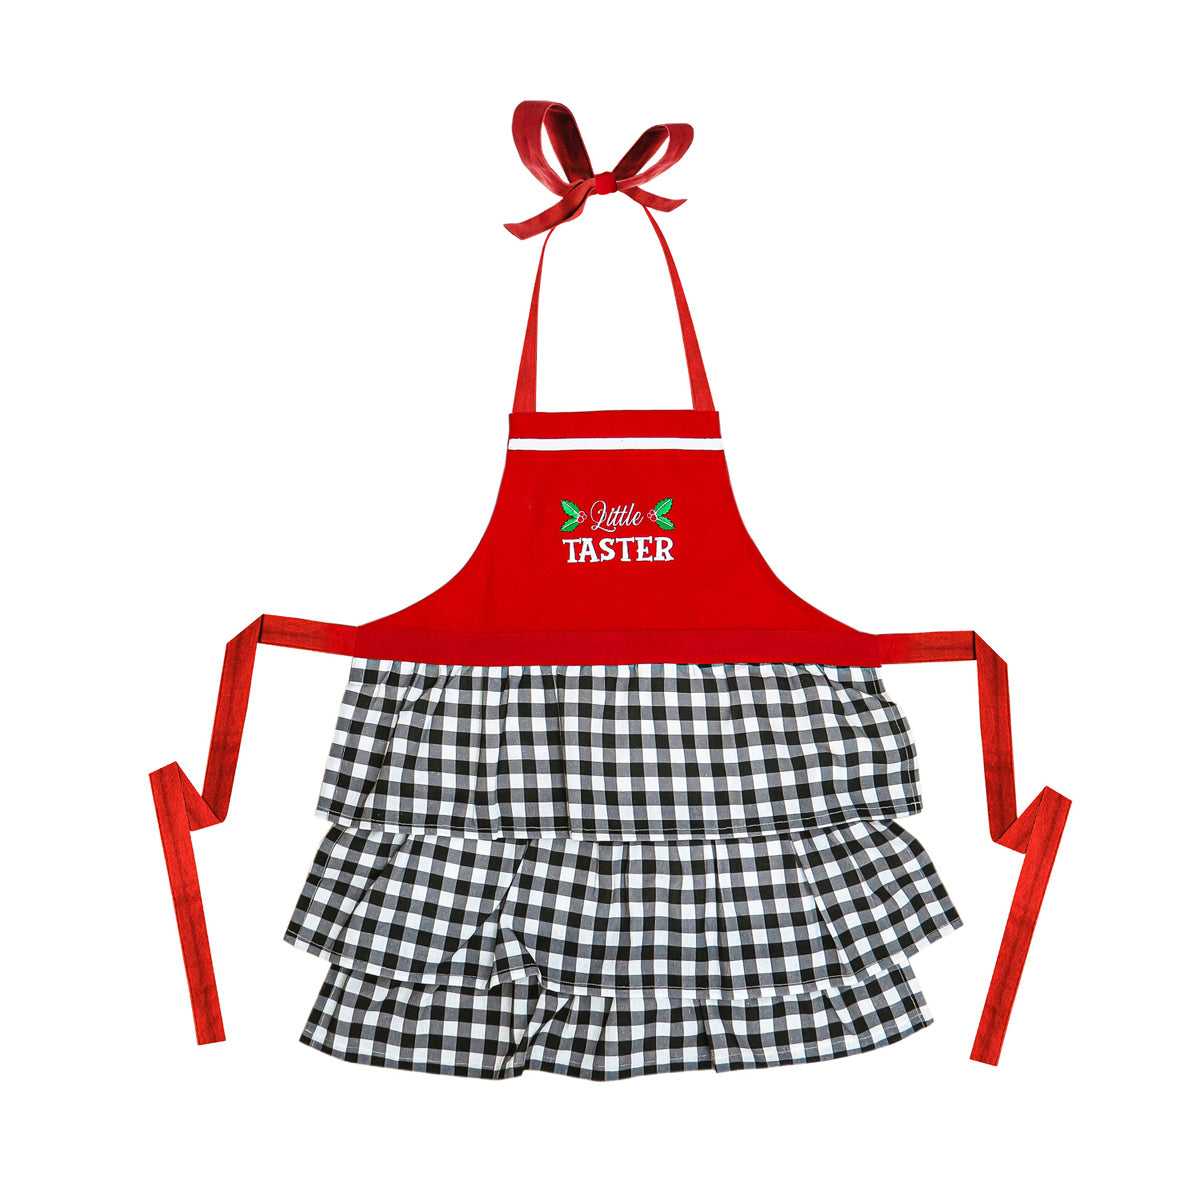 Mommy and Me Baker and Taster Apron Gift Set